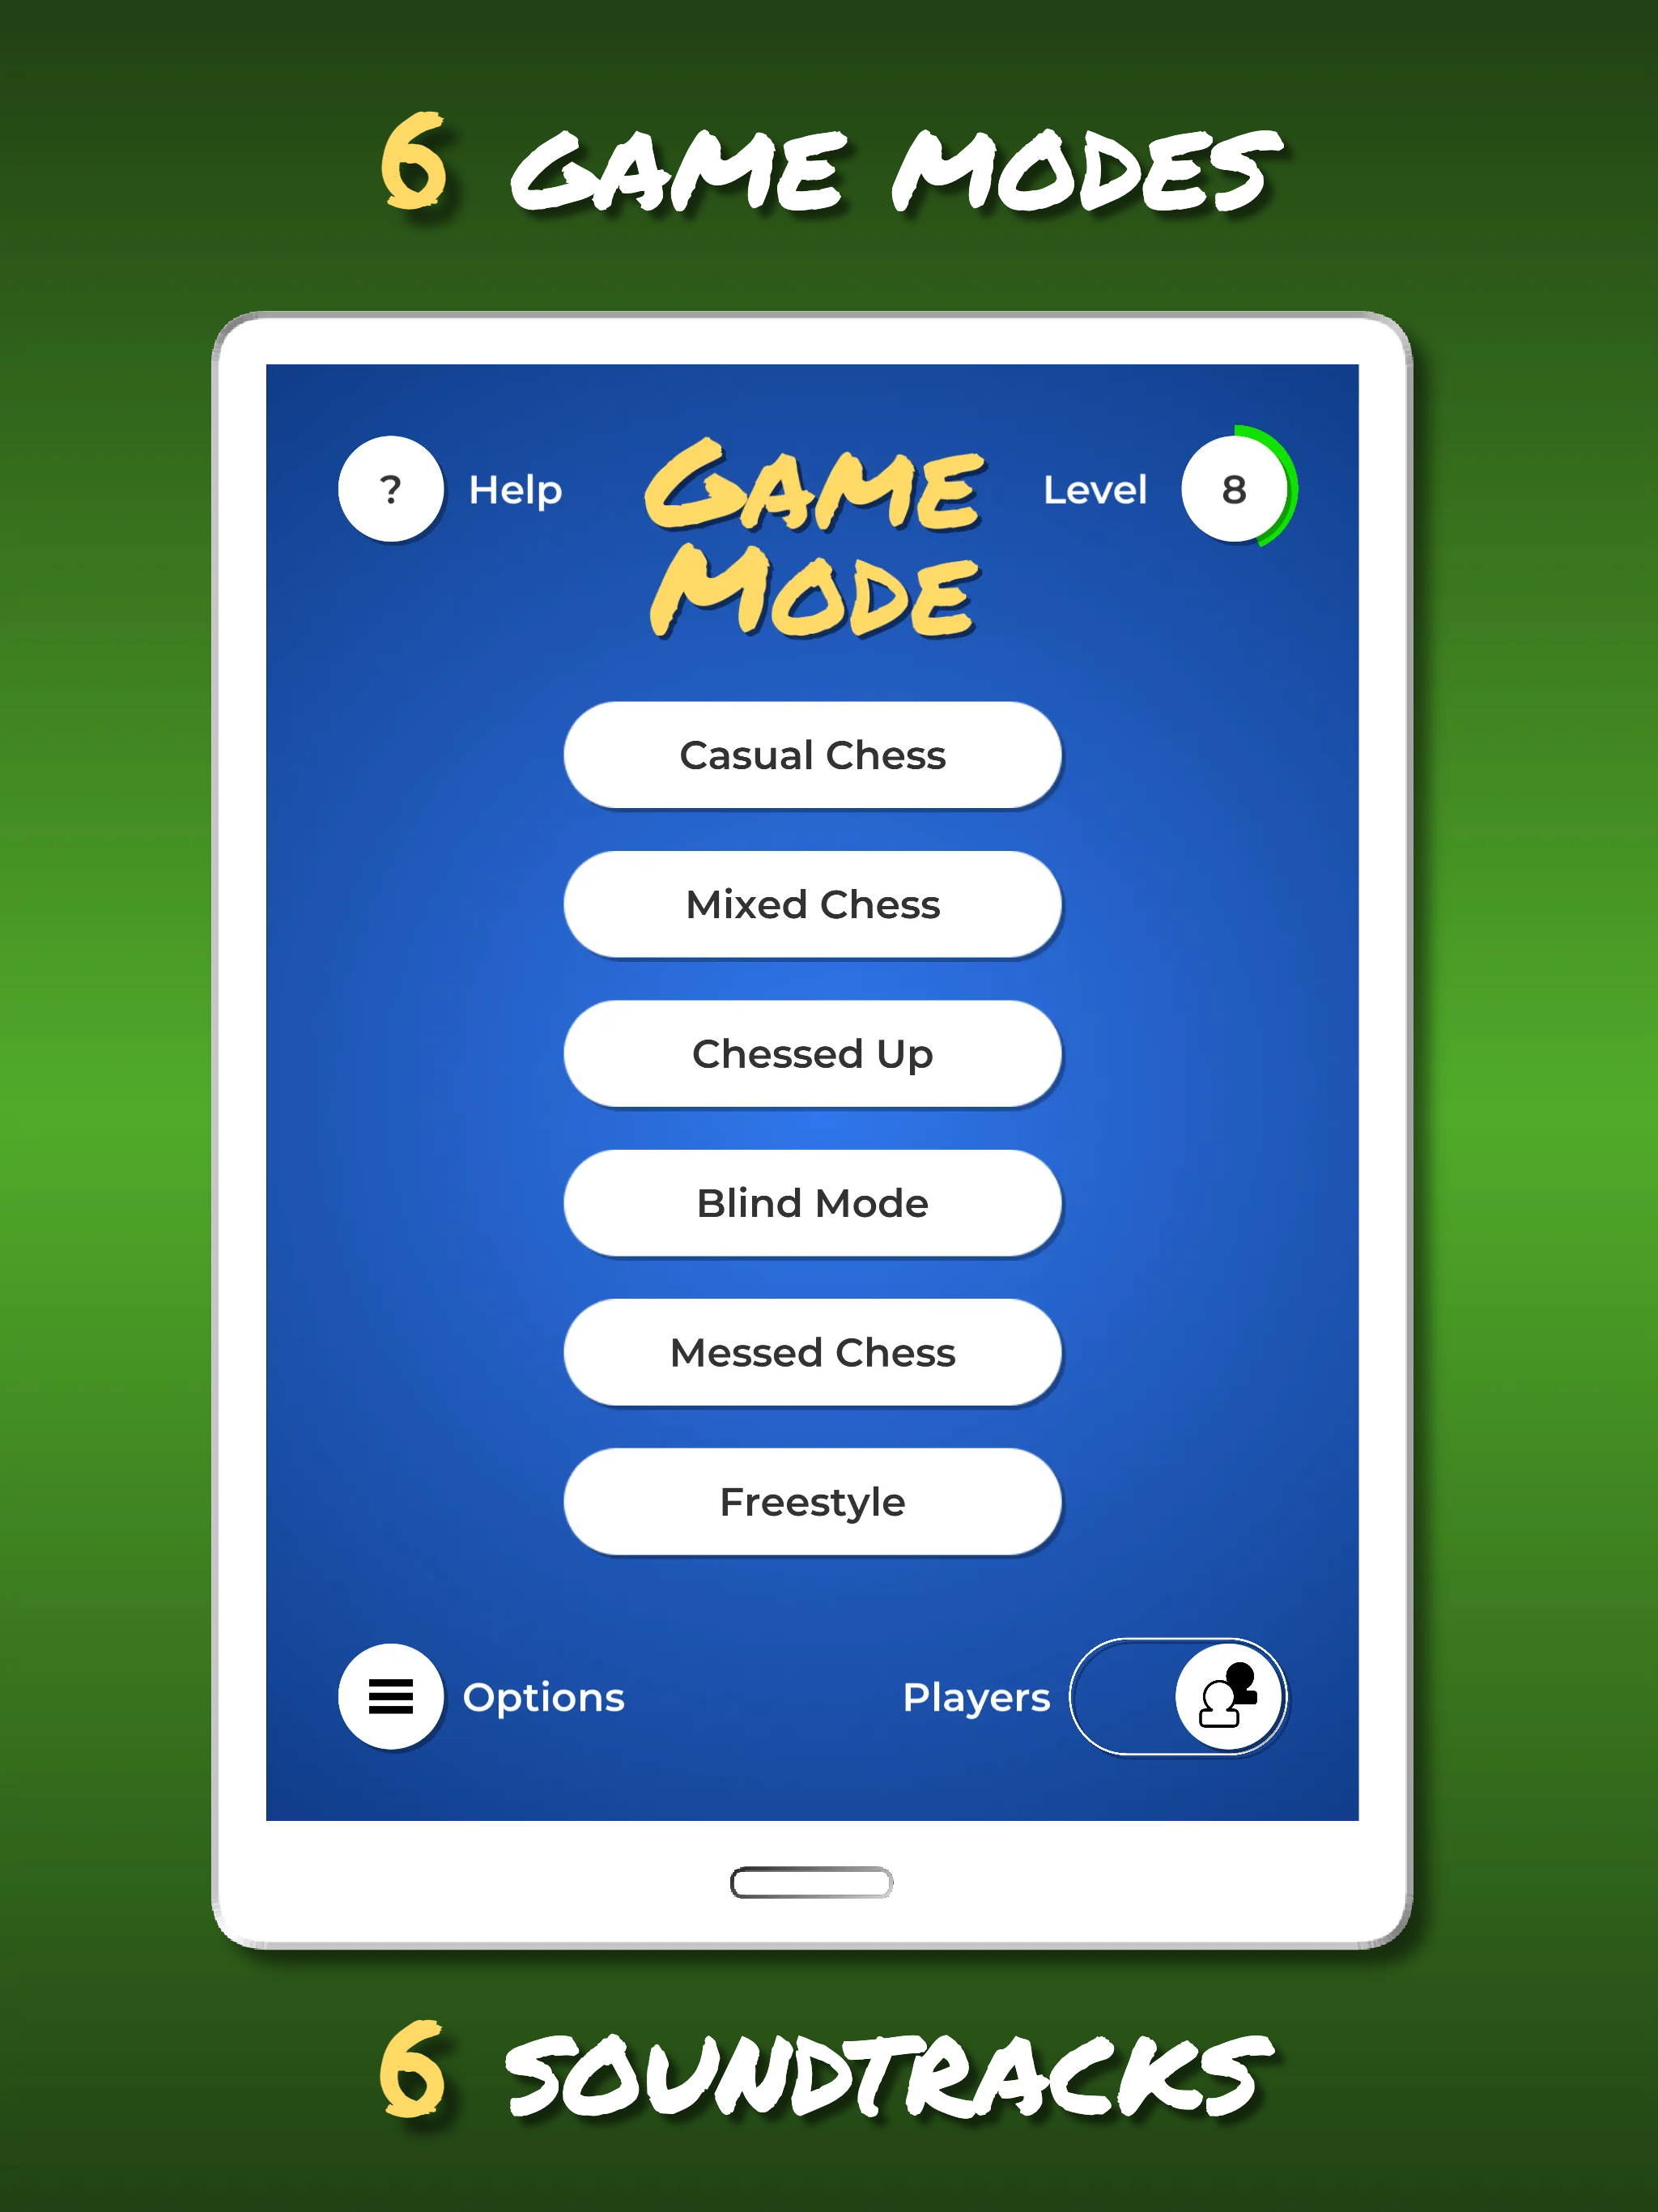 Promotional screenshot for Chessed Up game